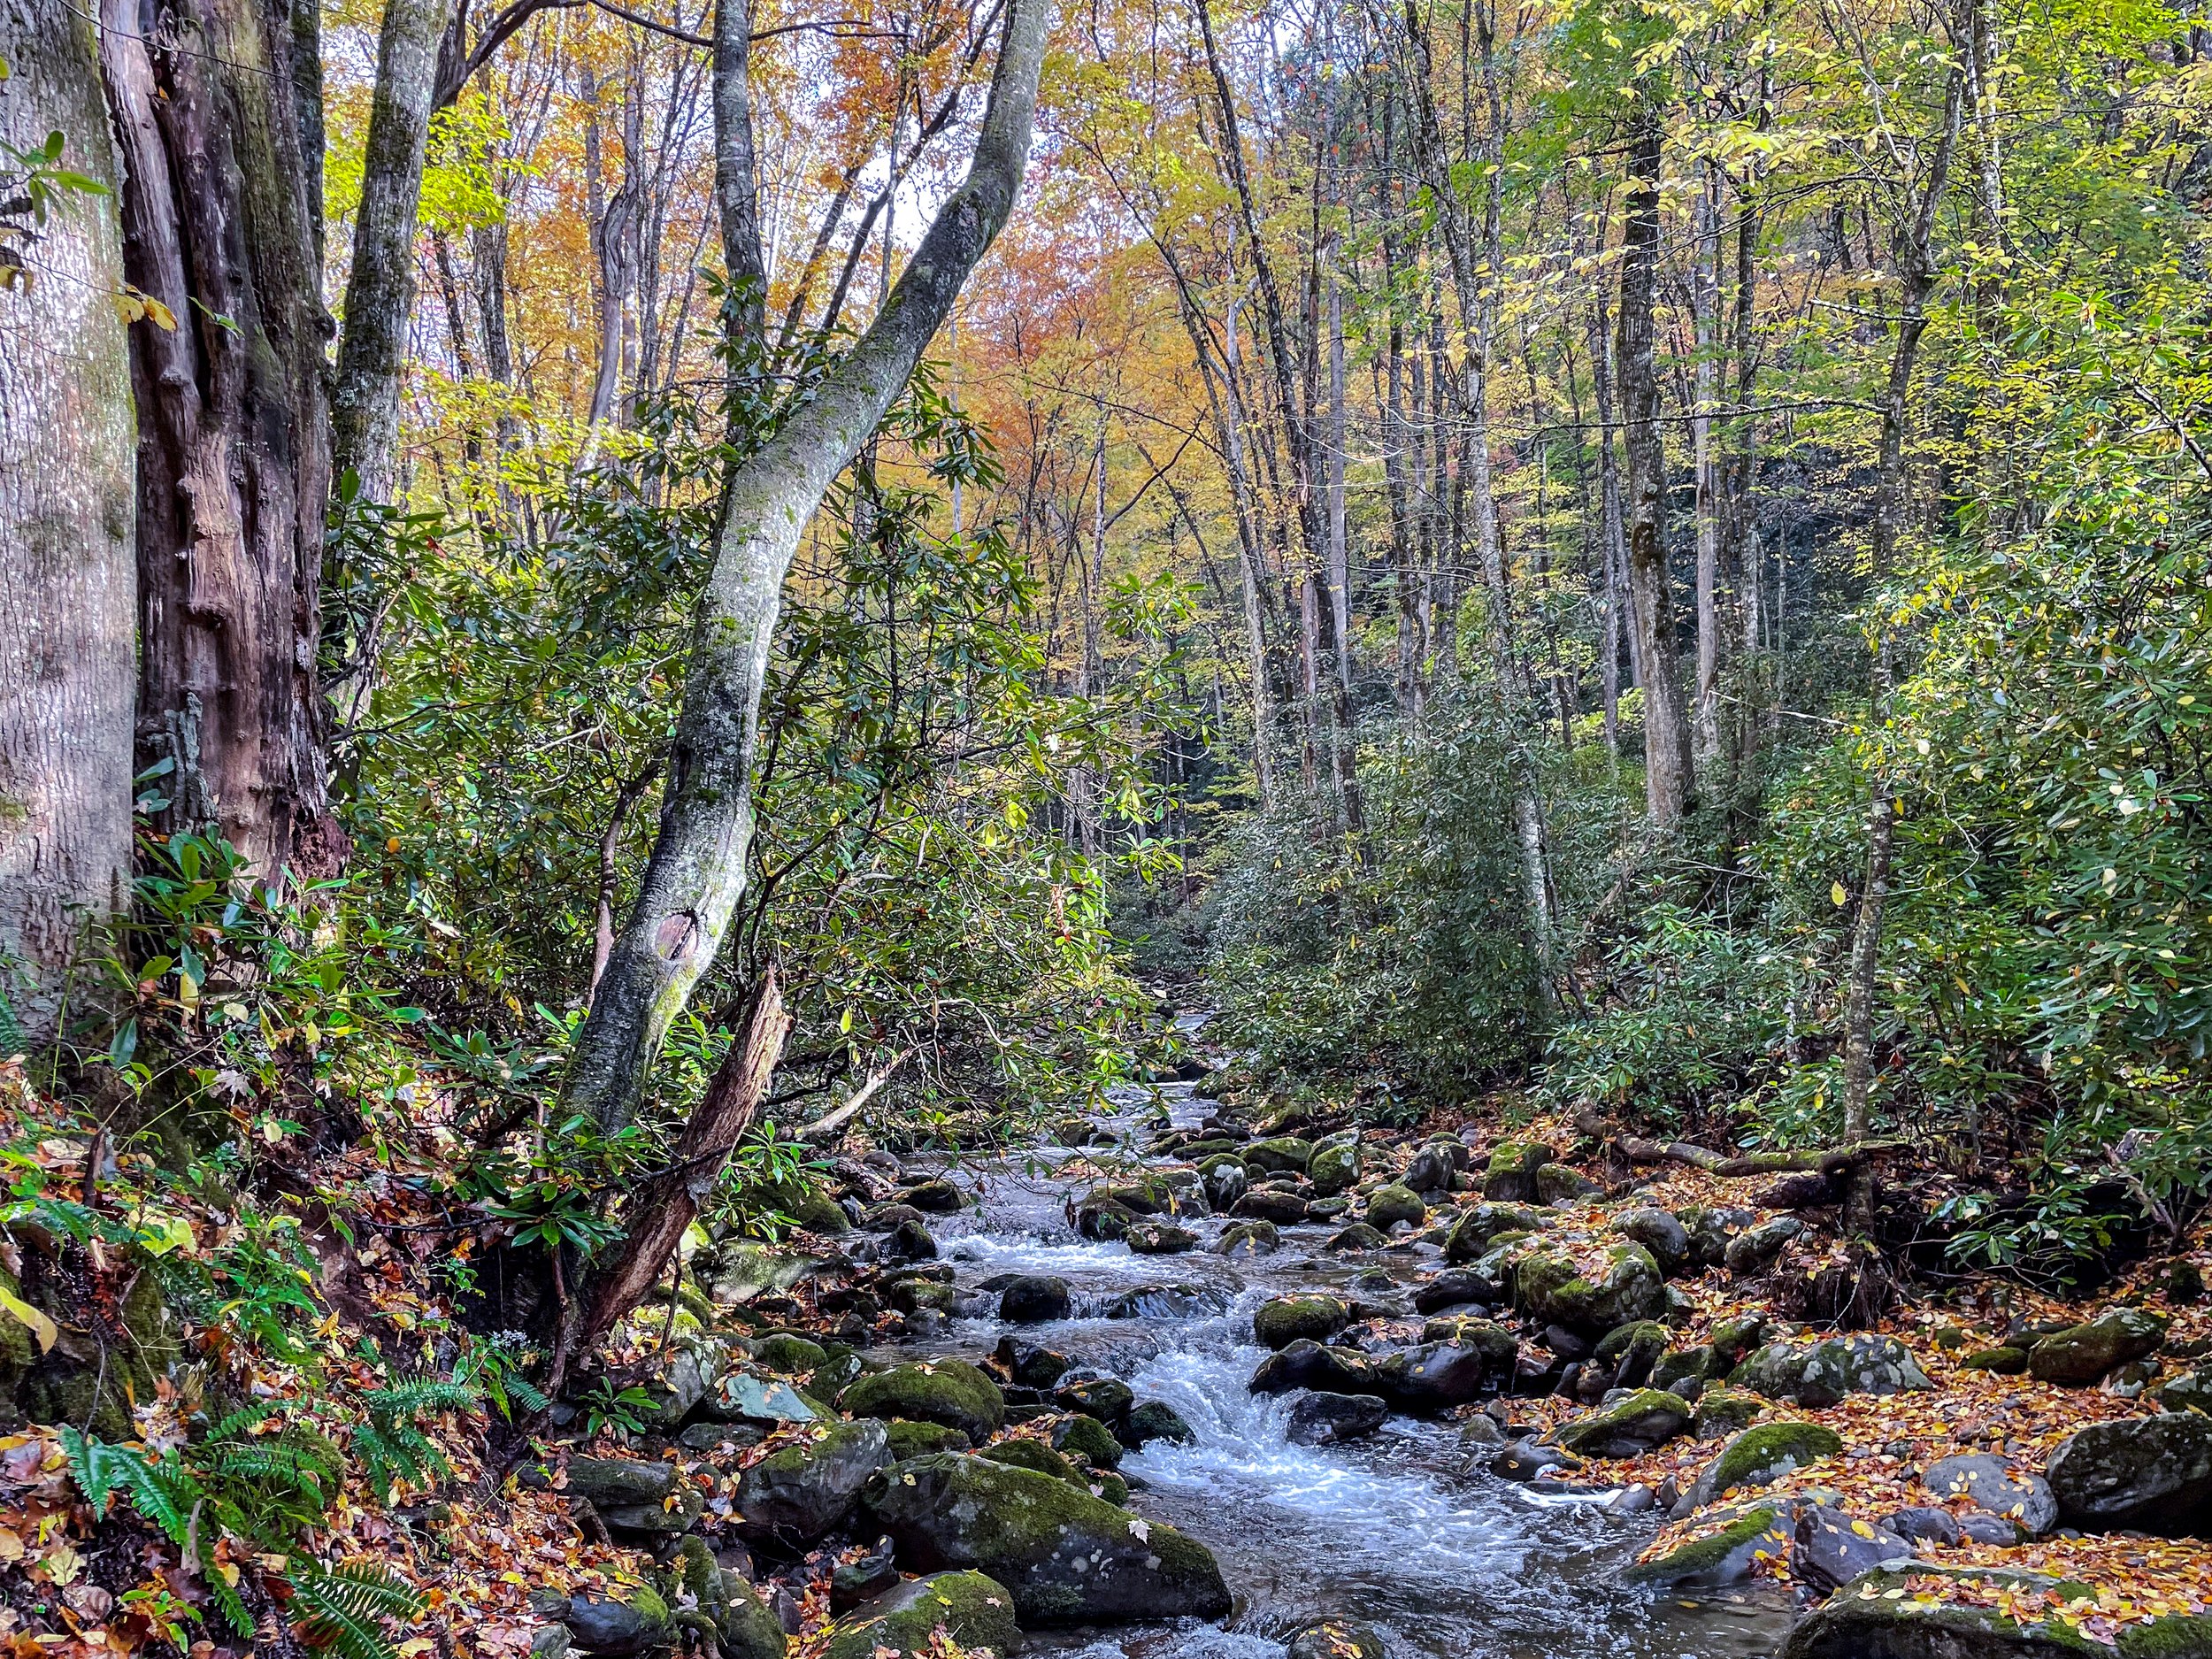  Water flows through creeks along the valley floor and into the Oconaluftee River, a major river running through nearby Cherokee land. Image credit: Jeffrey Rose, edits by Rachel Lense for The Science Writer 